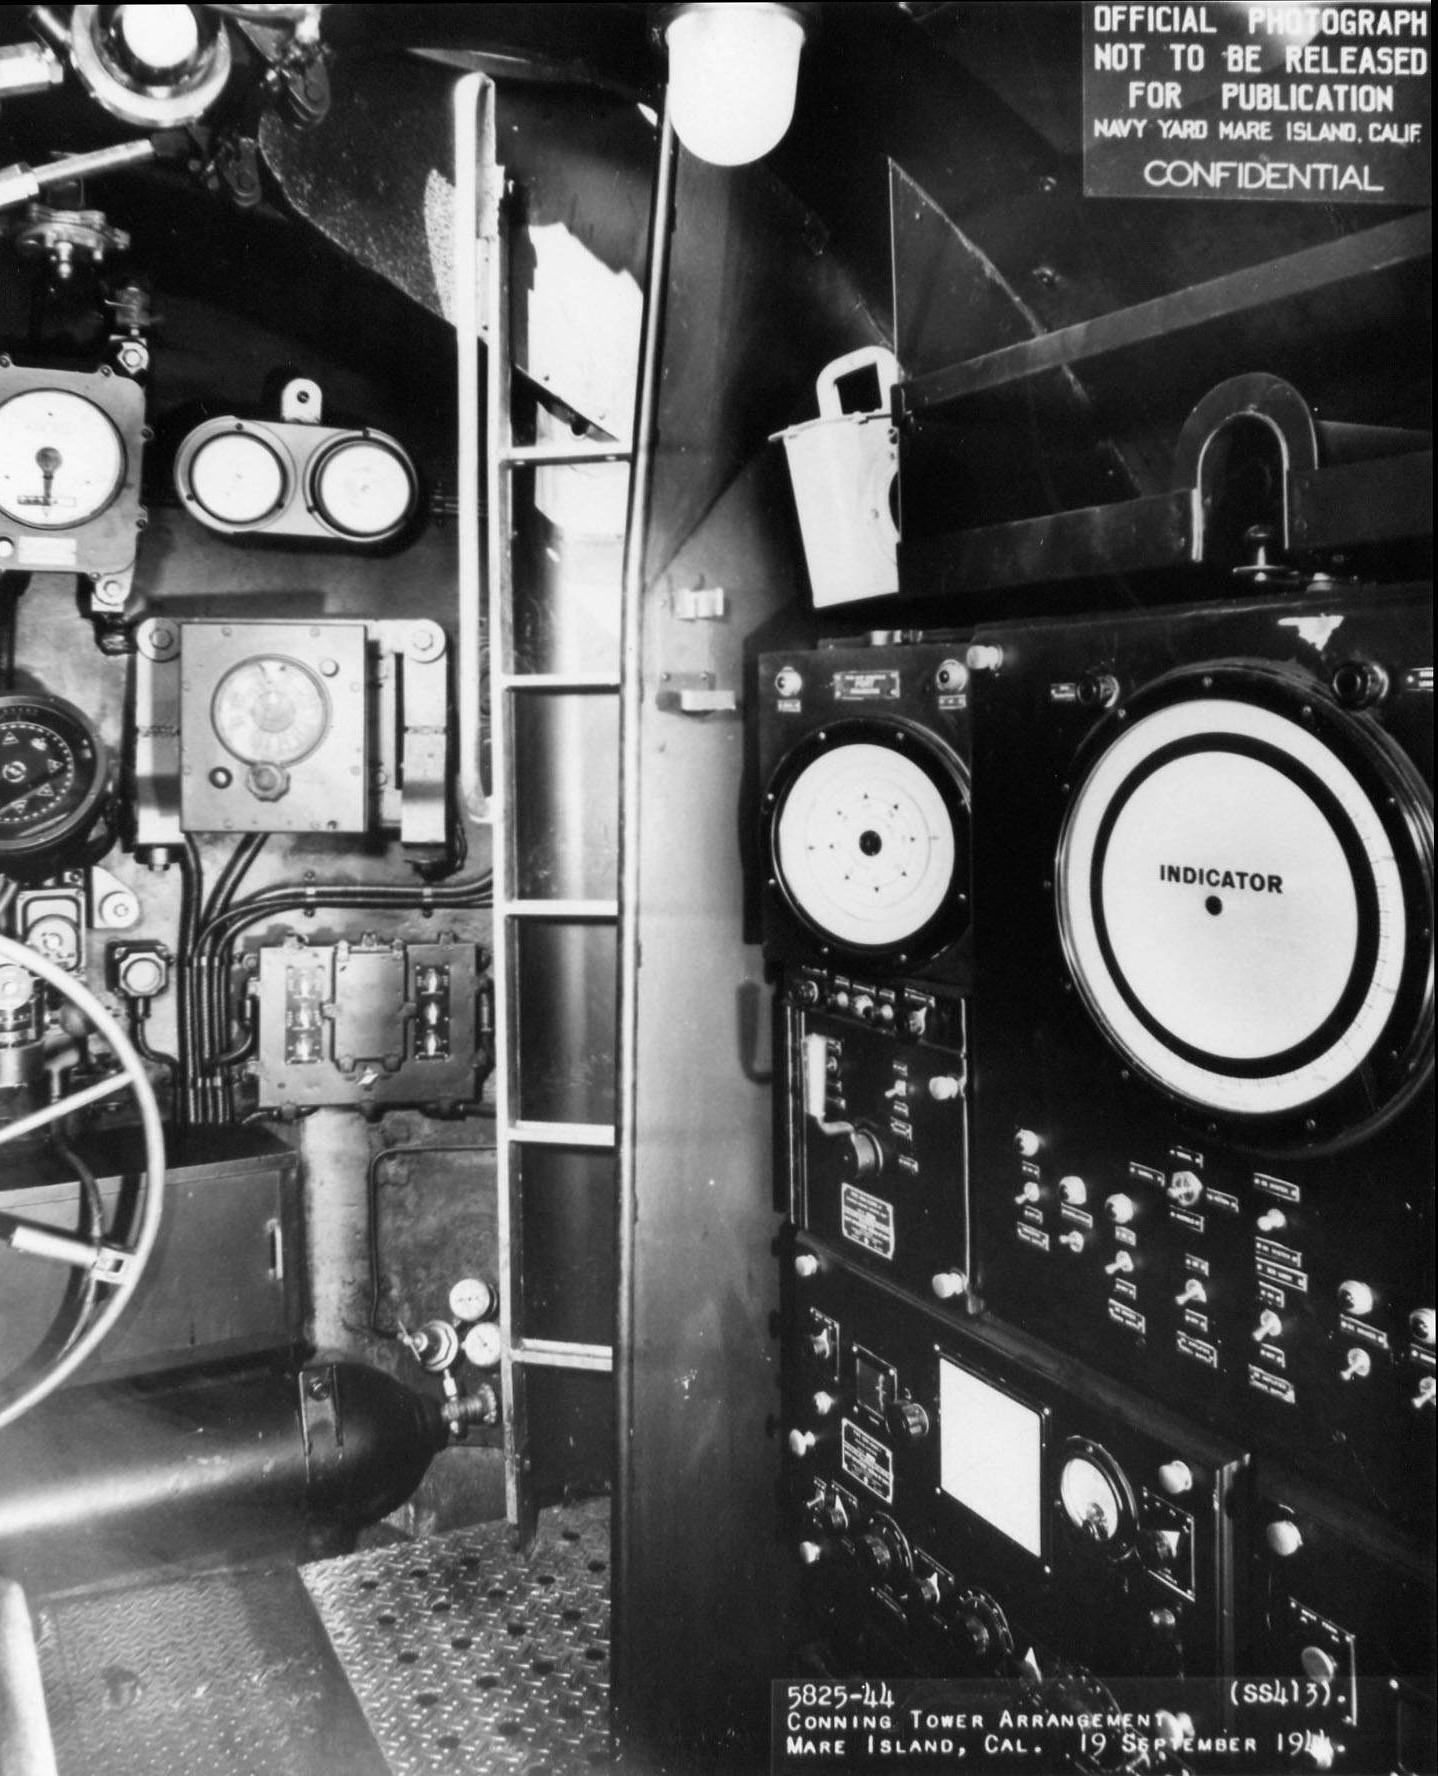 Inside the conning tower of USS Spot, Mare Island Naval Shipyard, Vallejo, California, United States, 19 Sep 1944